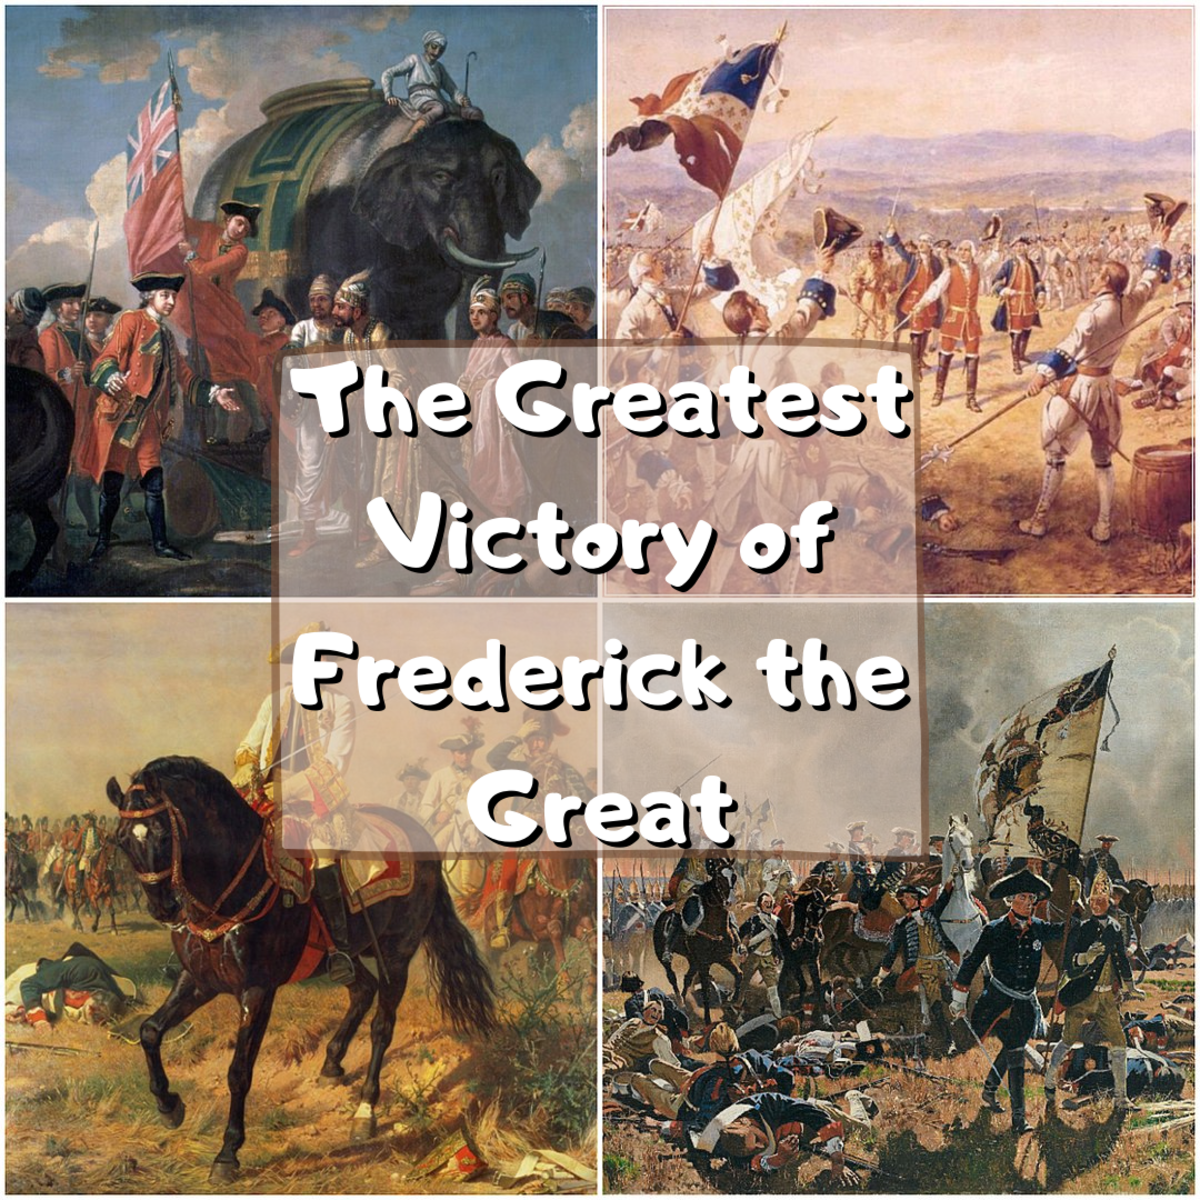 Read on to learn who Frederick the Great was and his role in the War of Austrian Succession and Diplomatic Revolution.